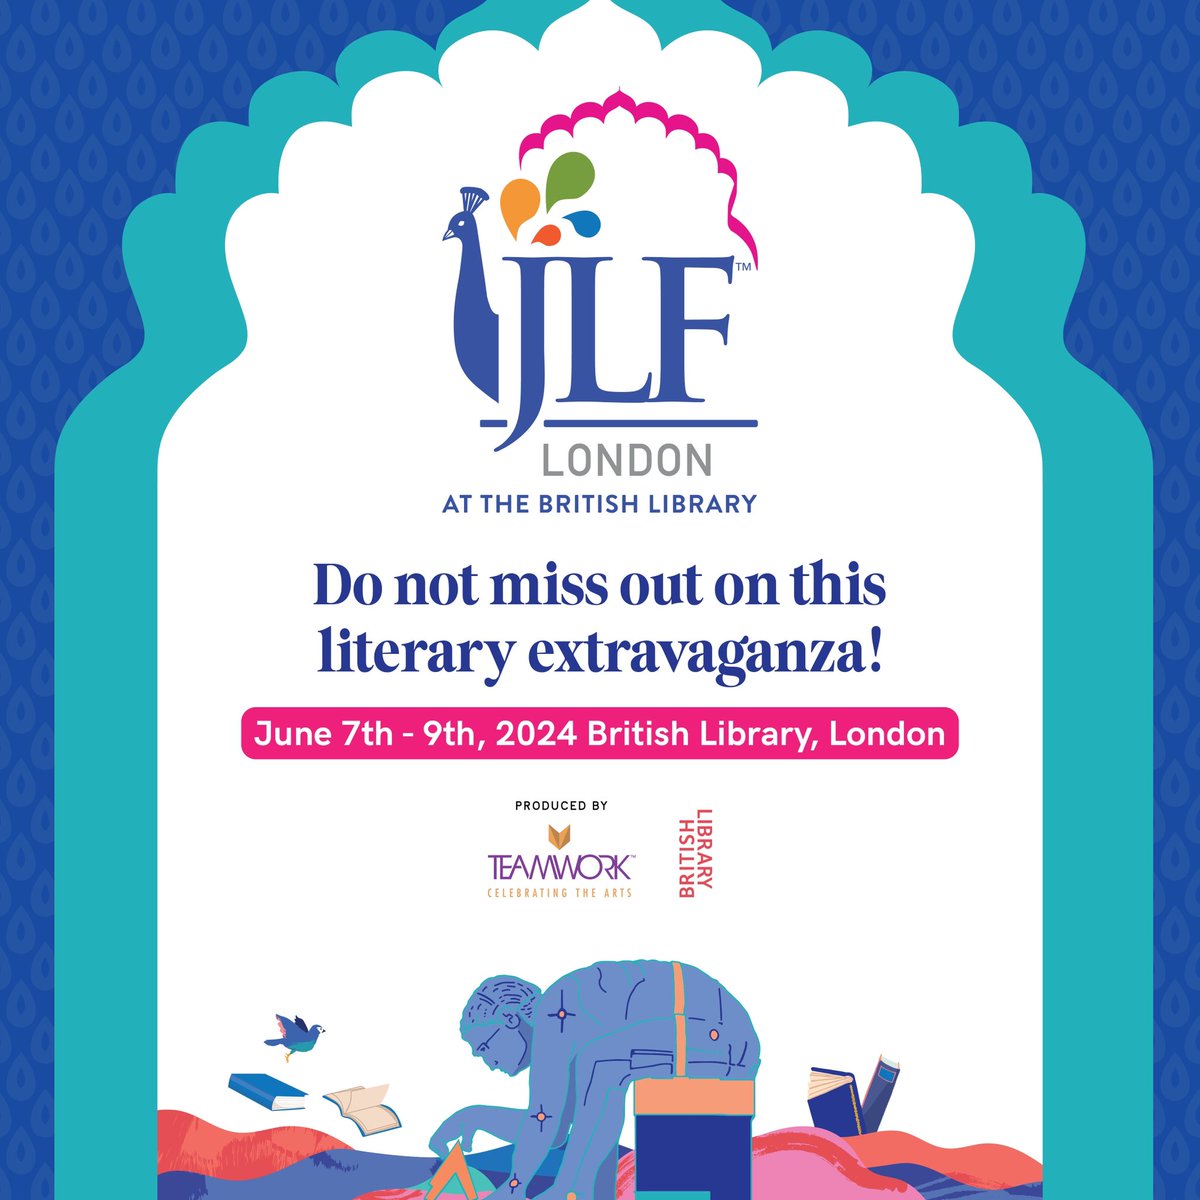 Save the date! JLF London at the British Library is back, showcasing an inspiring array of writers, speakers, and thinkers from around the world, from June 7th to 9th, 2024. Don't miss out—mark your calendars!